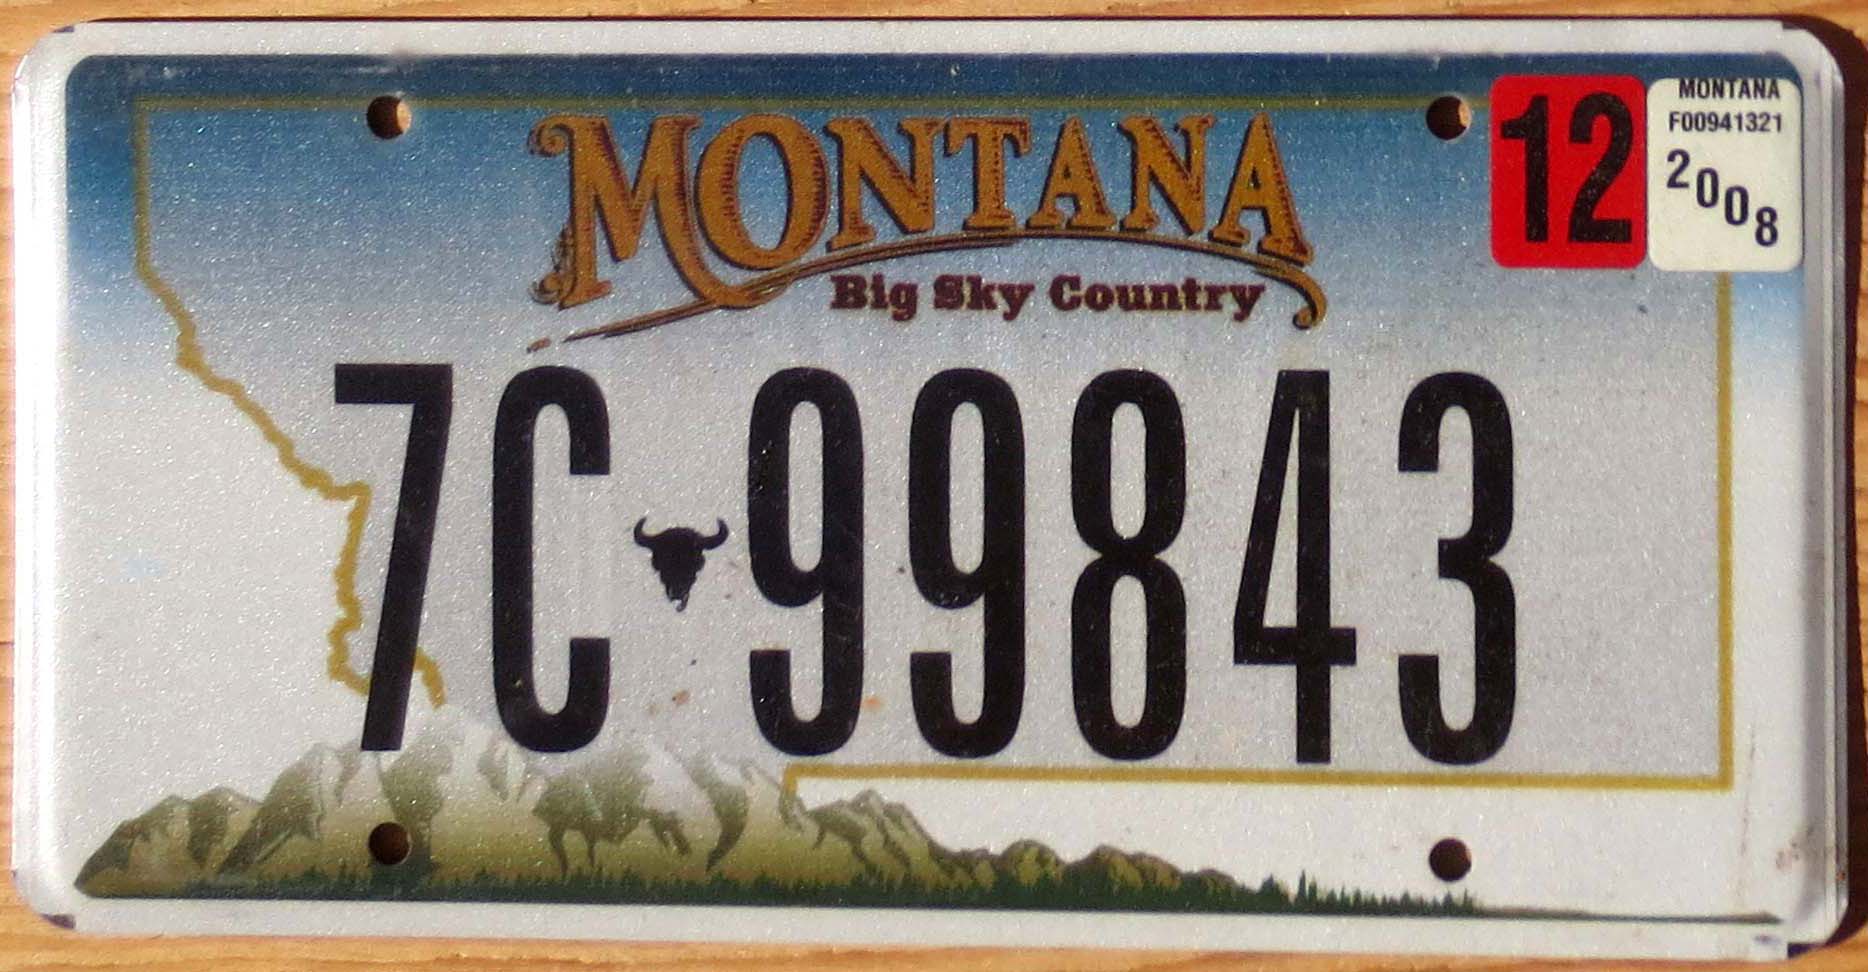 2008 Montana exc Automobile License Plate Store Collectible License